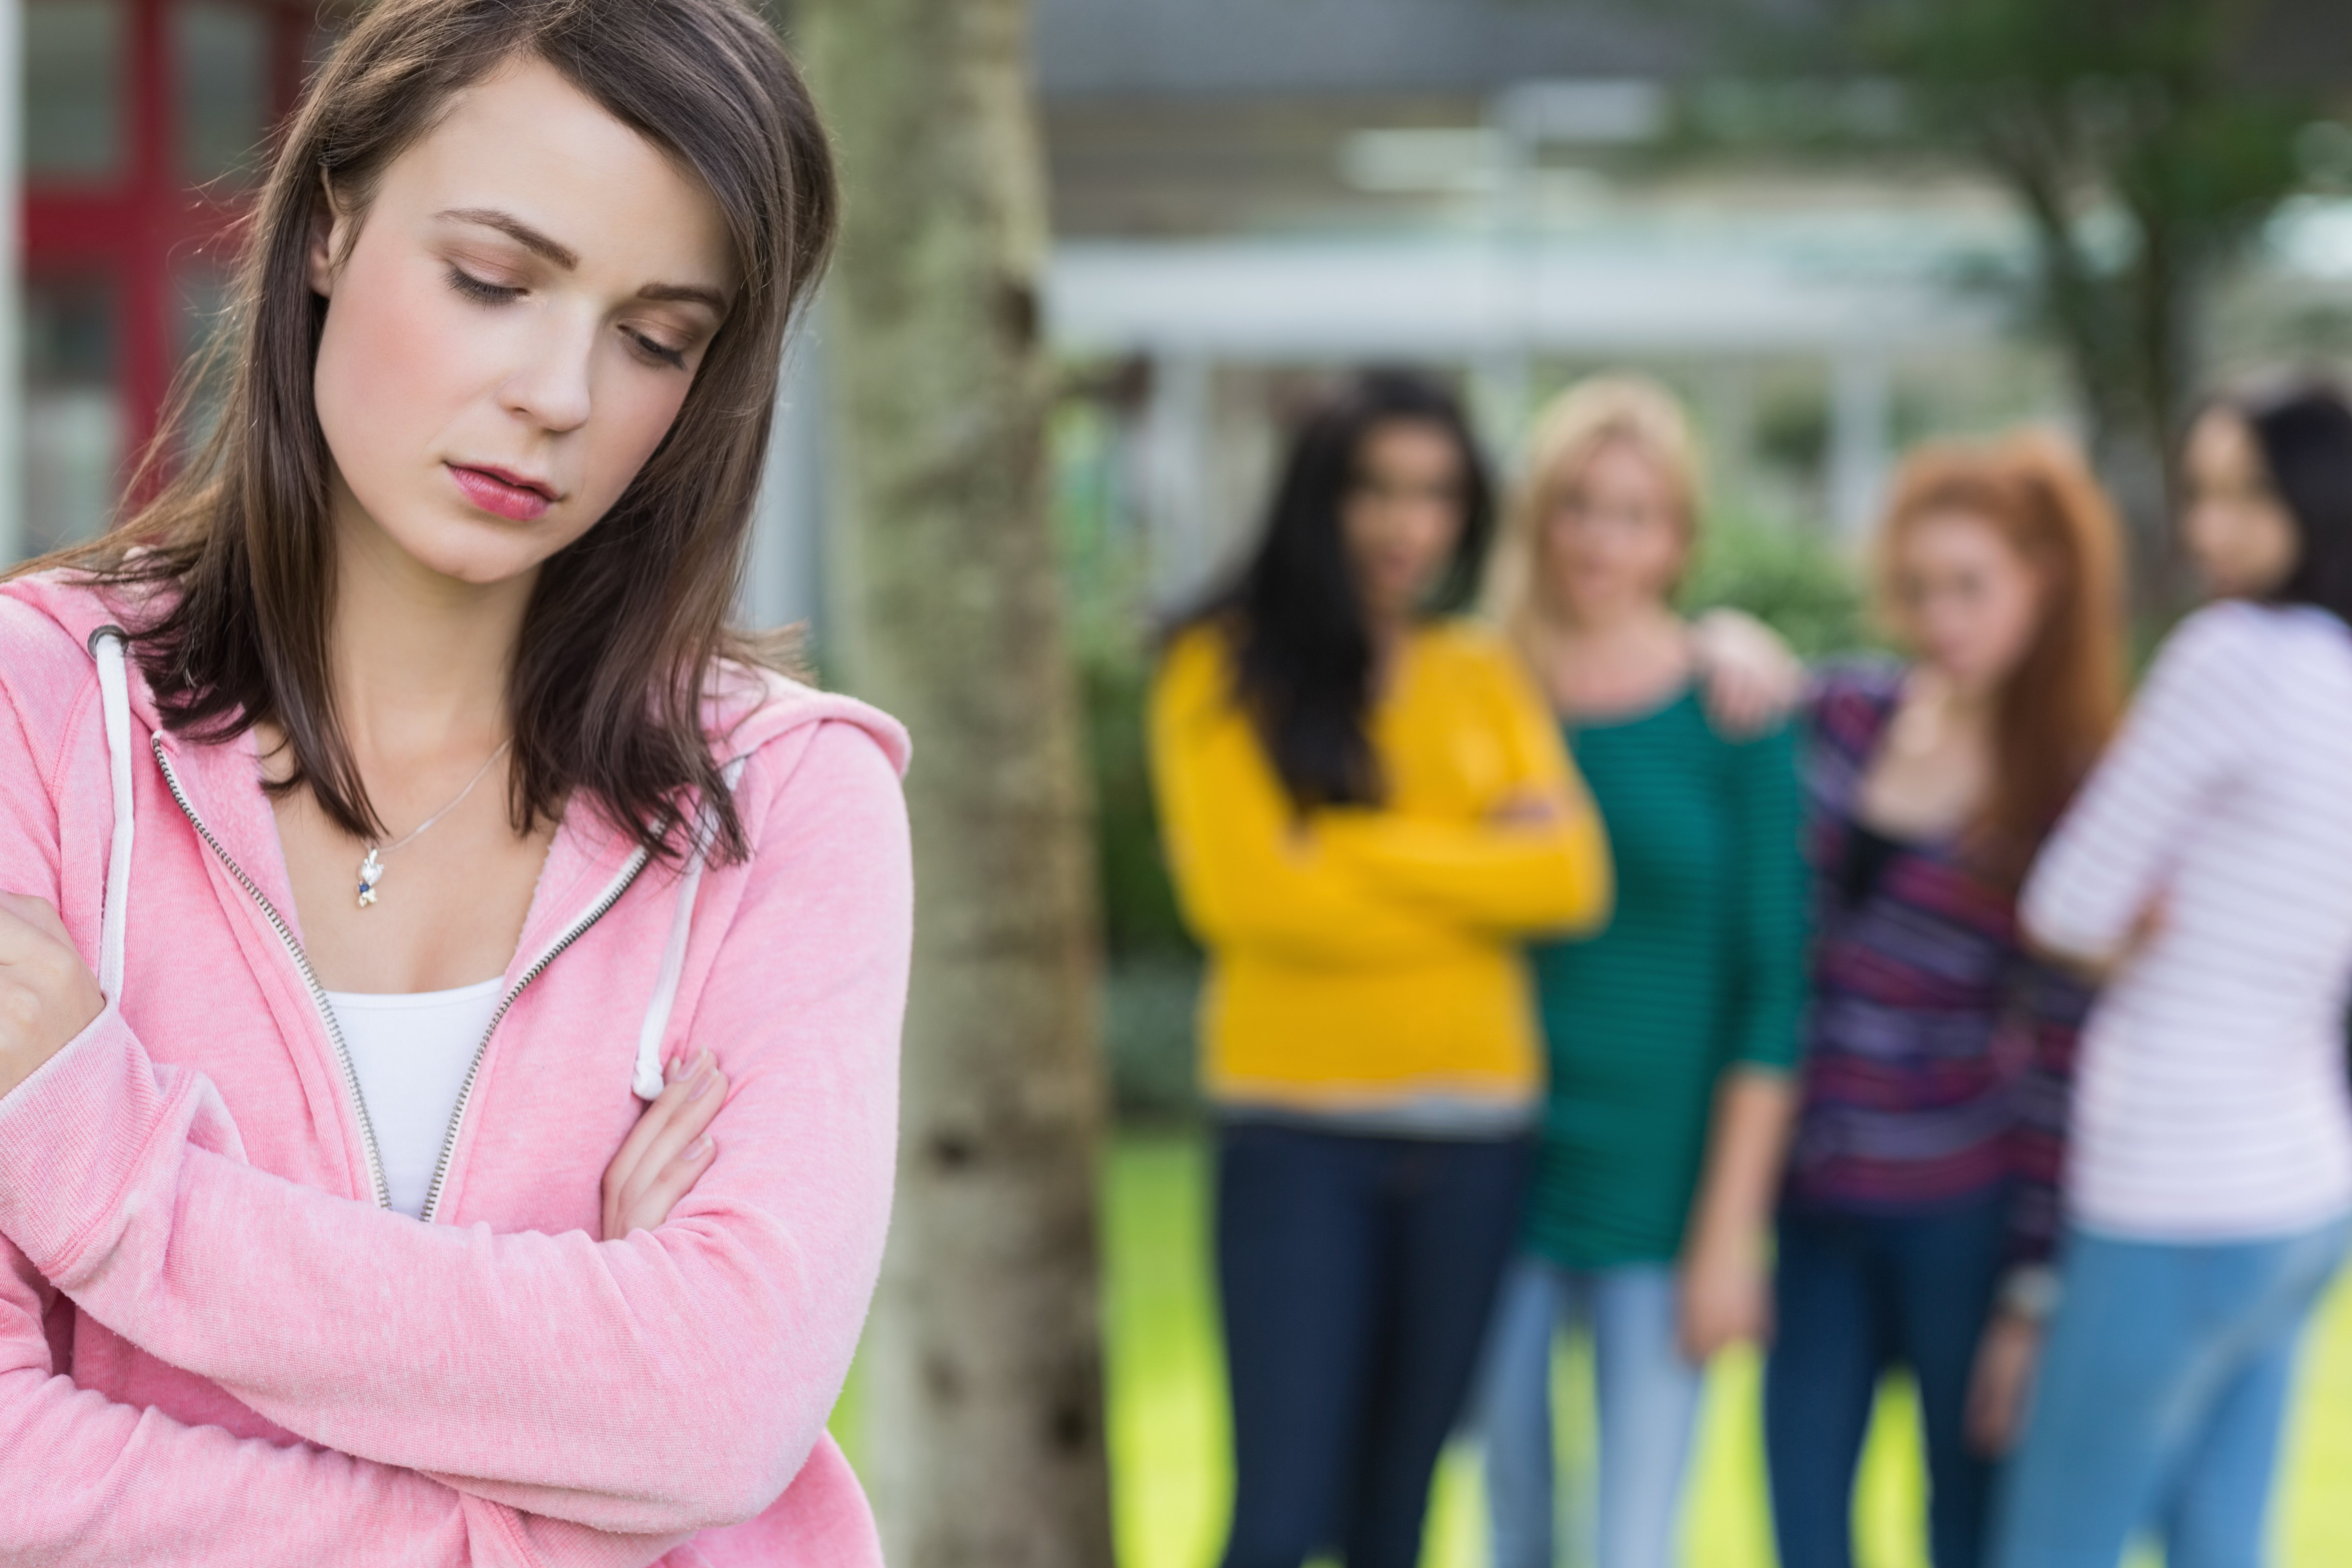 Young woman student appears bullied by other female students